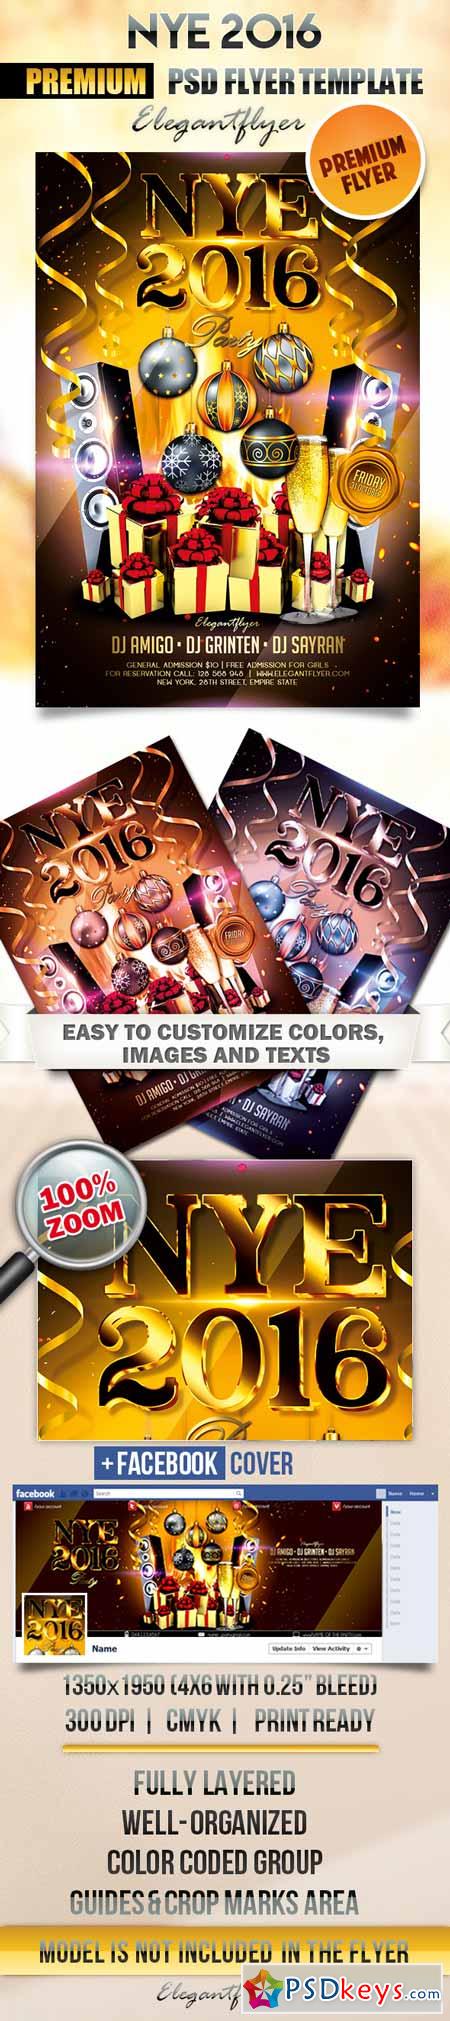 10 2016 Facebook Cover Photo Template PSD Free Images